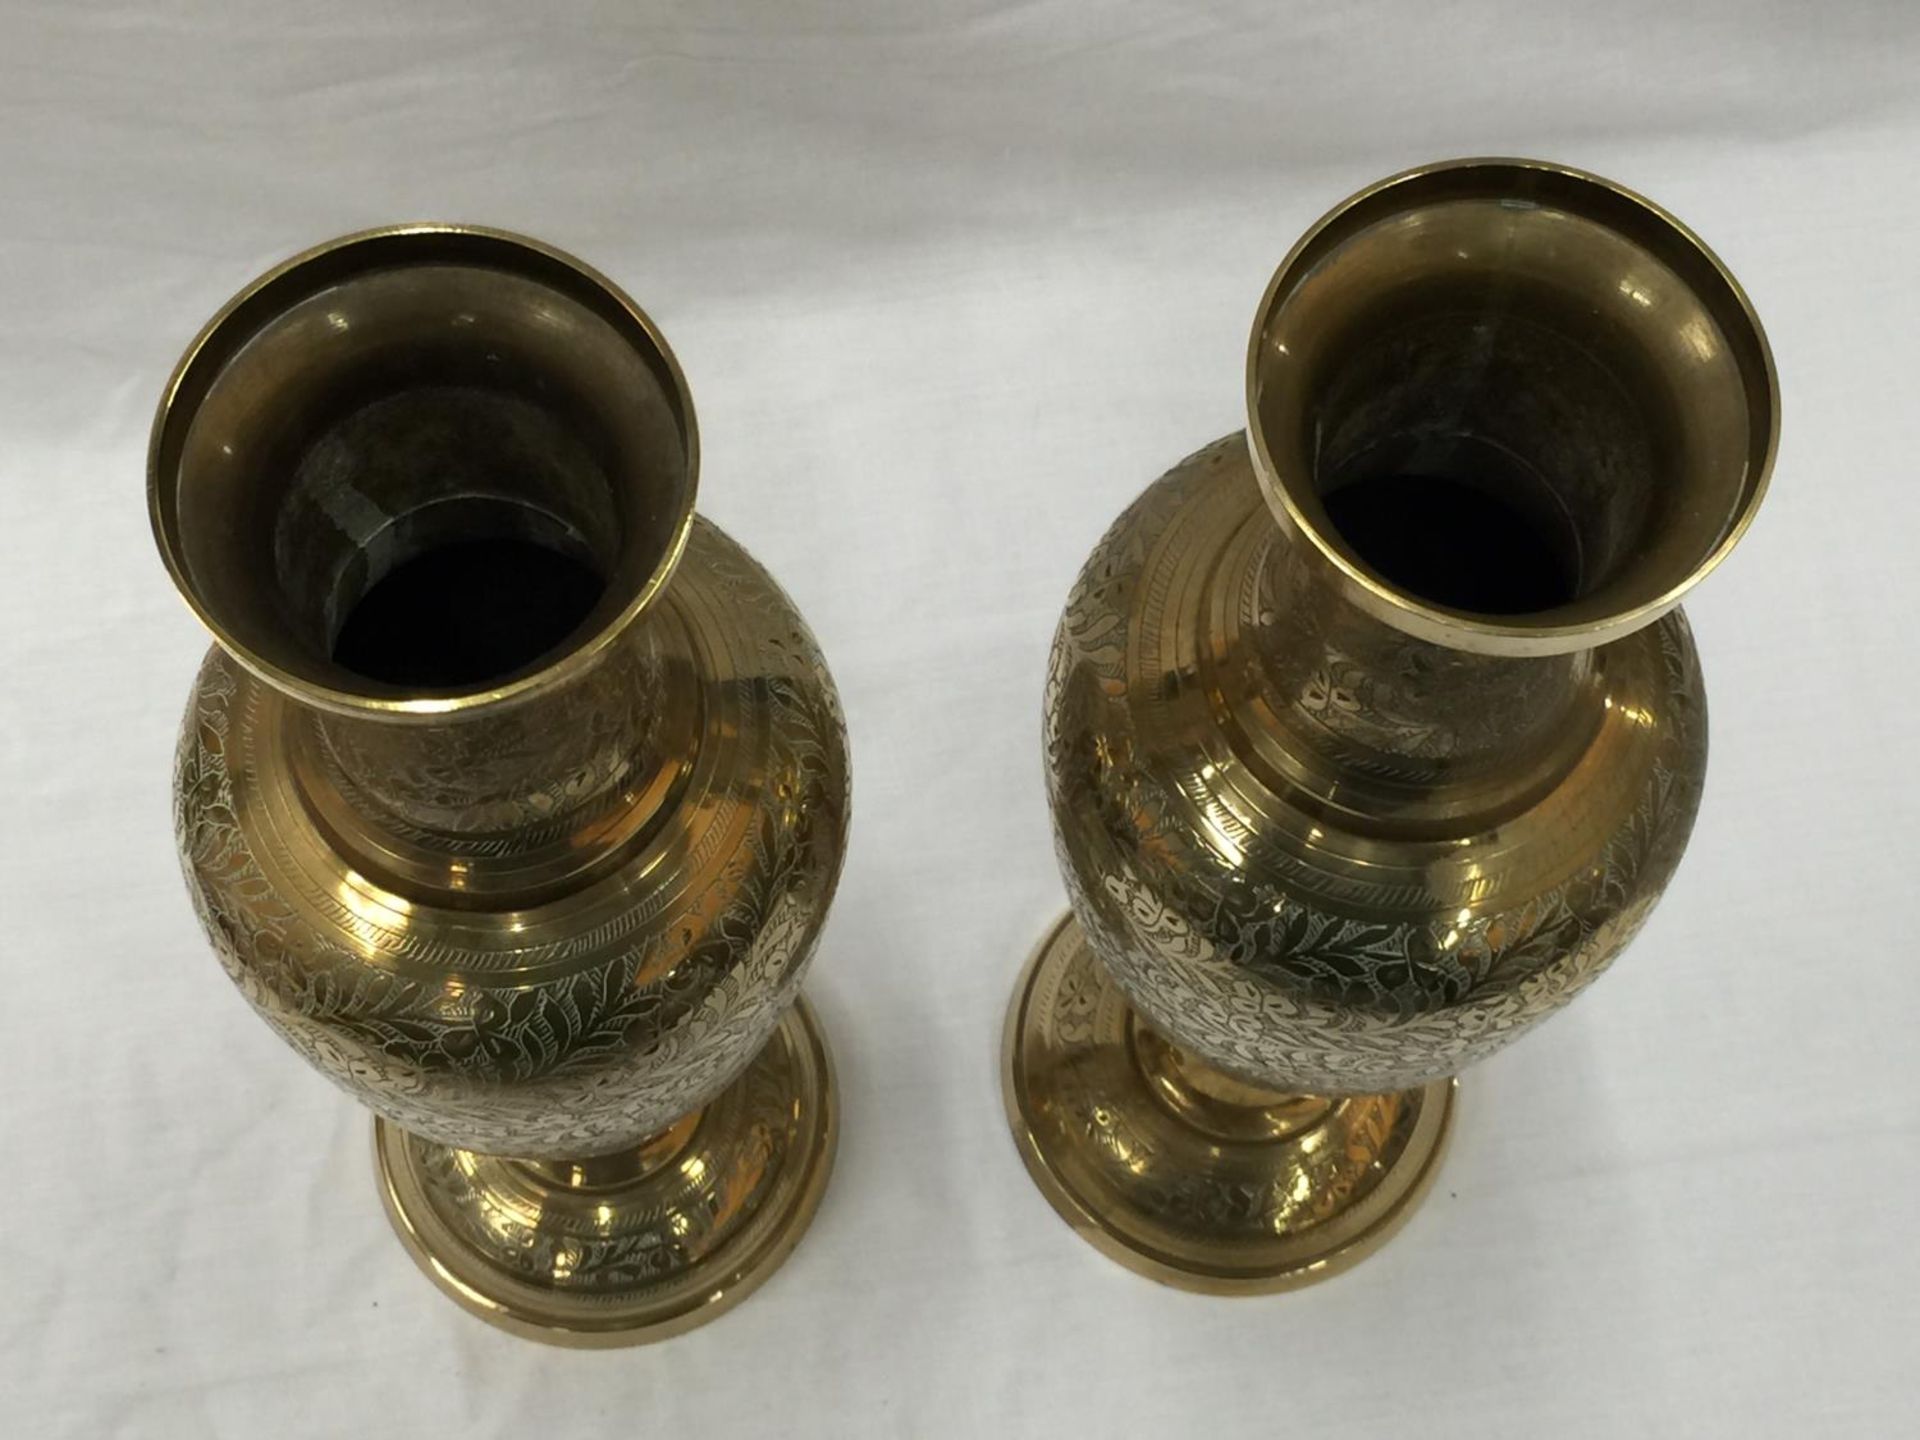 A PAIR OF HEAVY BRASS INDIAN STYLE VASES WITH ETCHED FLORAL LEAF DESIGN H: 45CM - Image 12 of 12